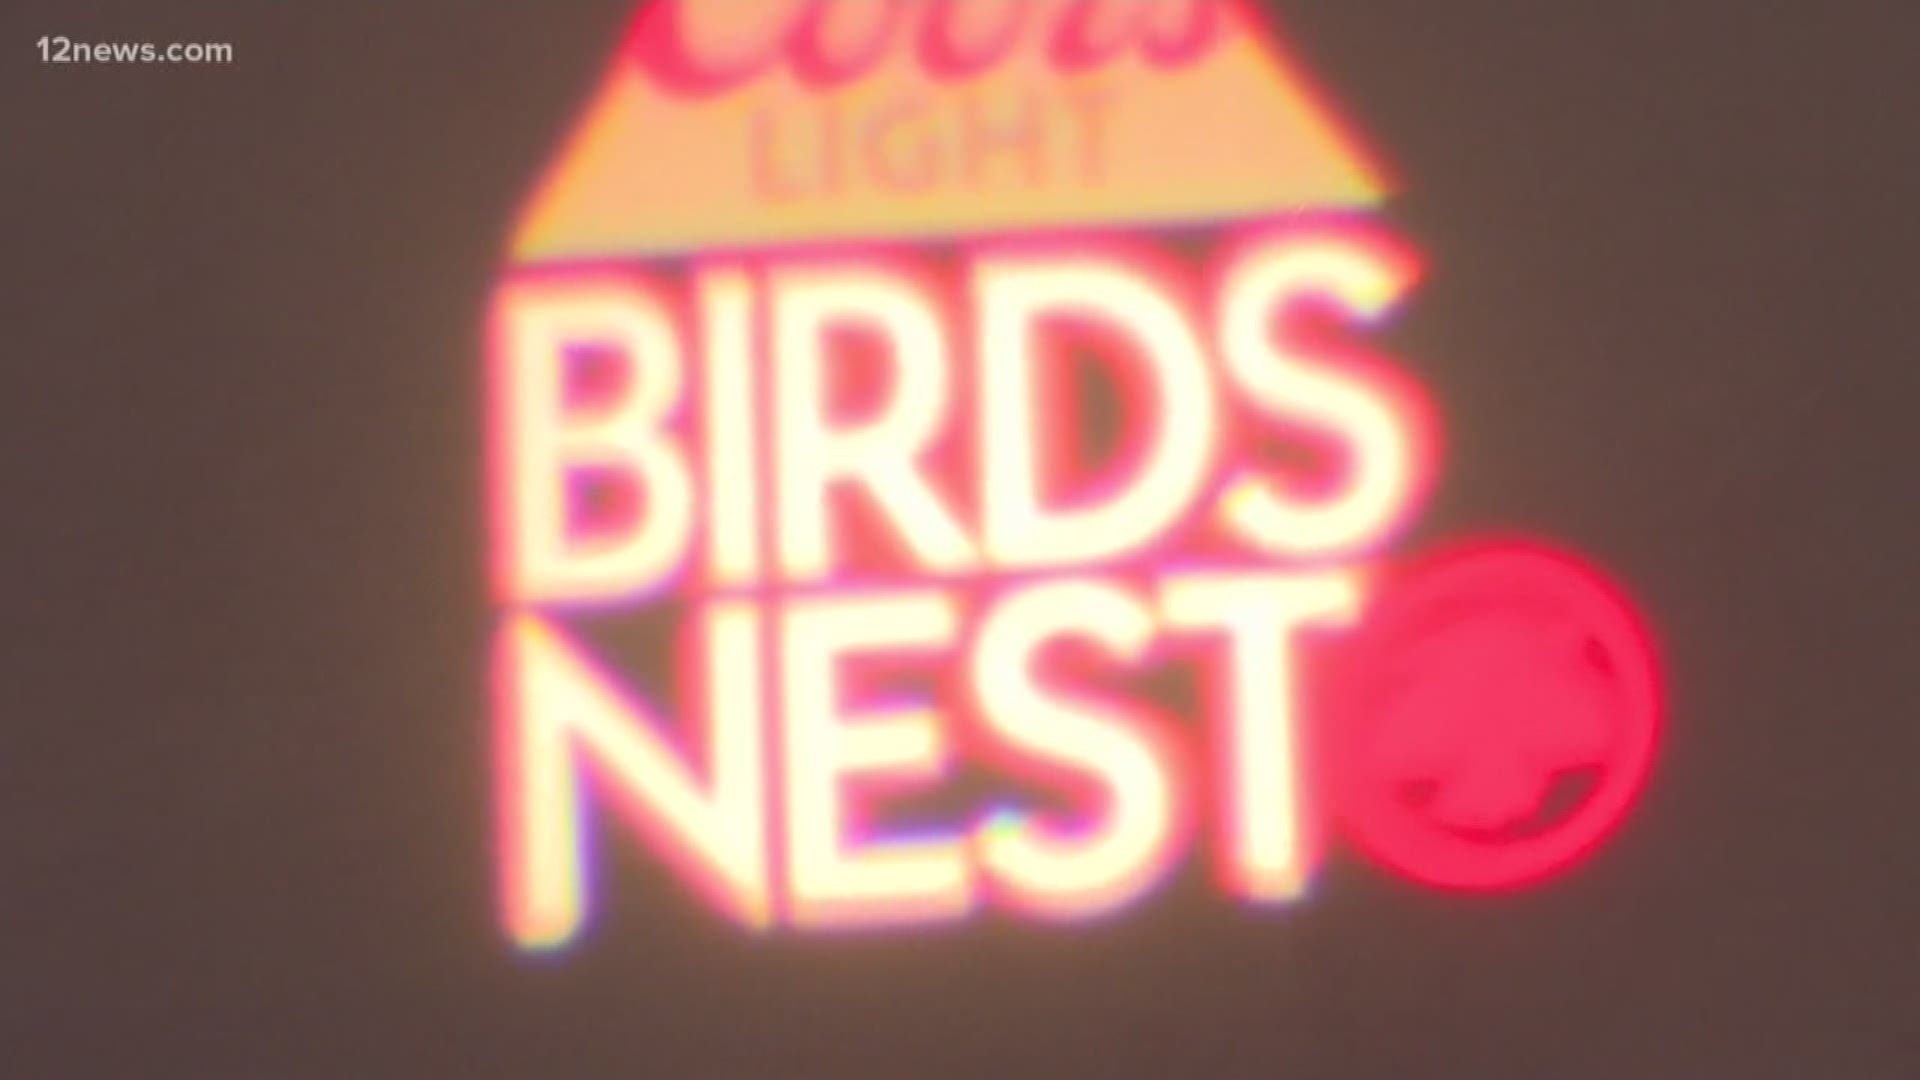 The 2019 Coors Light Birds Nest concert is a four day music fest begins Jan. 30 and tickets go on sale today at 9 a.m.